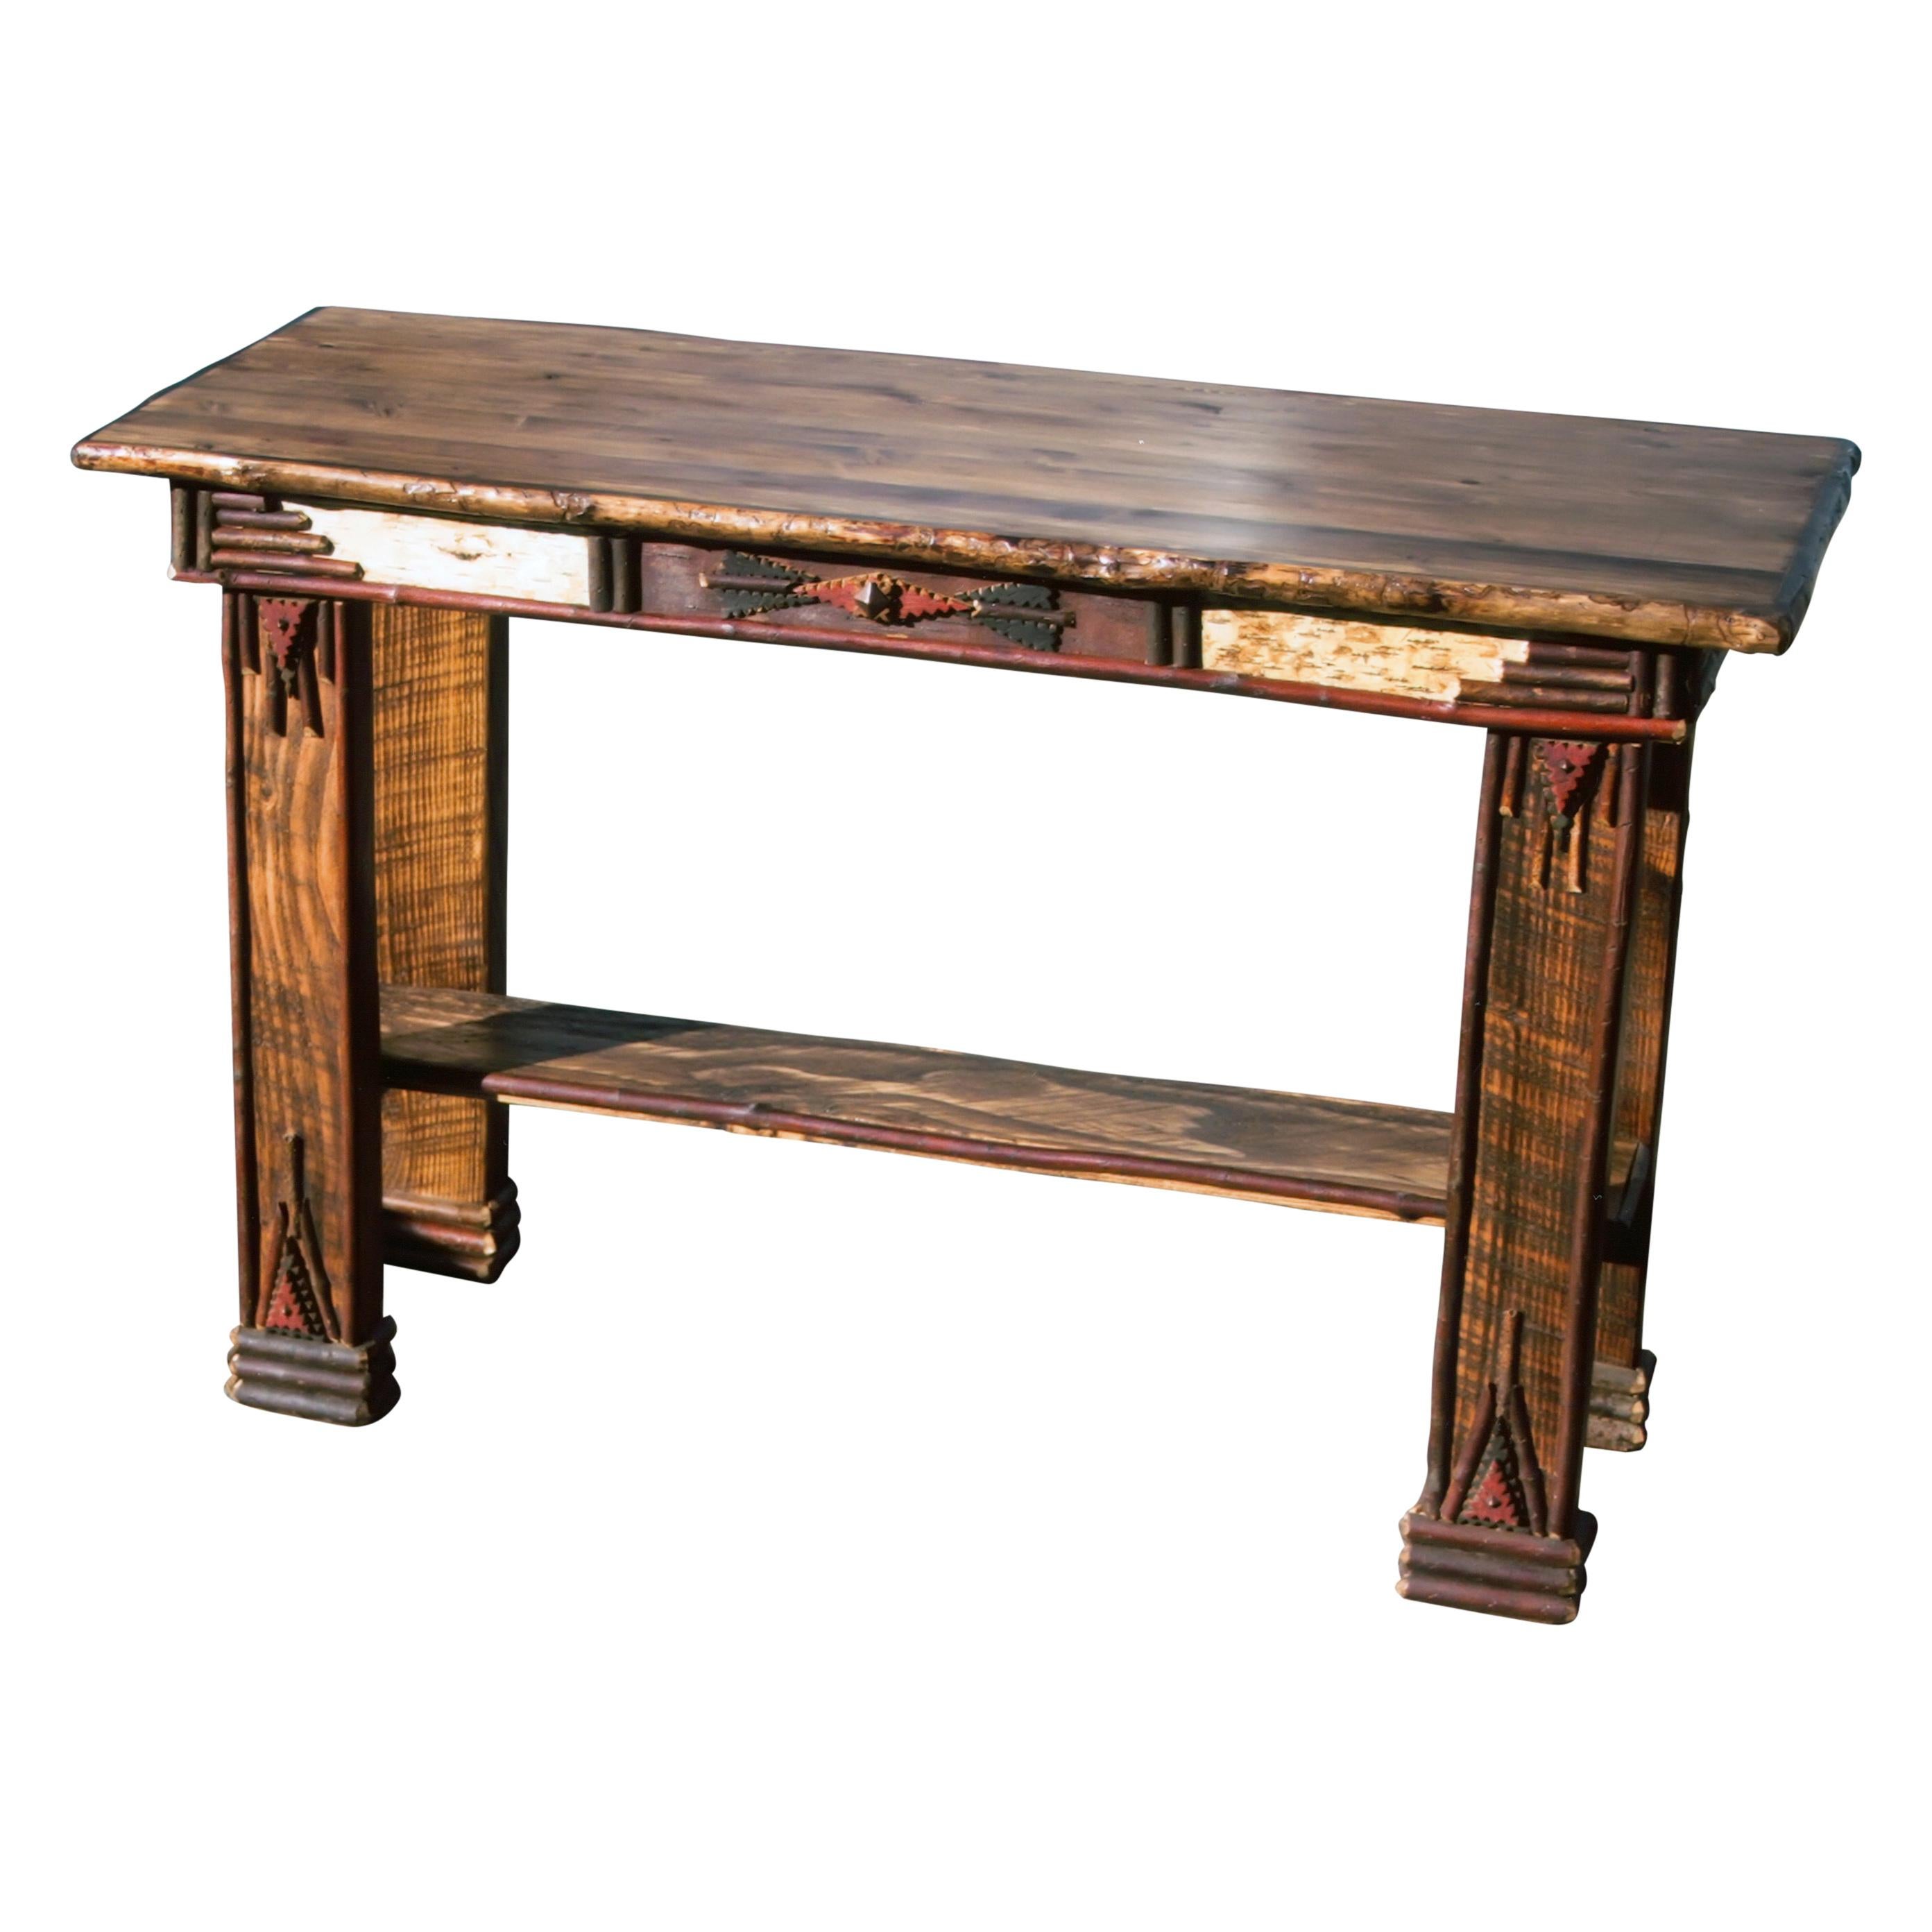 Tramp art style hall table. With lodge pole, birch bark, twig-work and hand notching, with bottom shelf. Built to order and can be customized by color, details and dimensions with additional production time. 

Period: Contemporary

Origin: